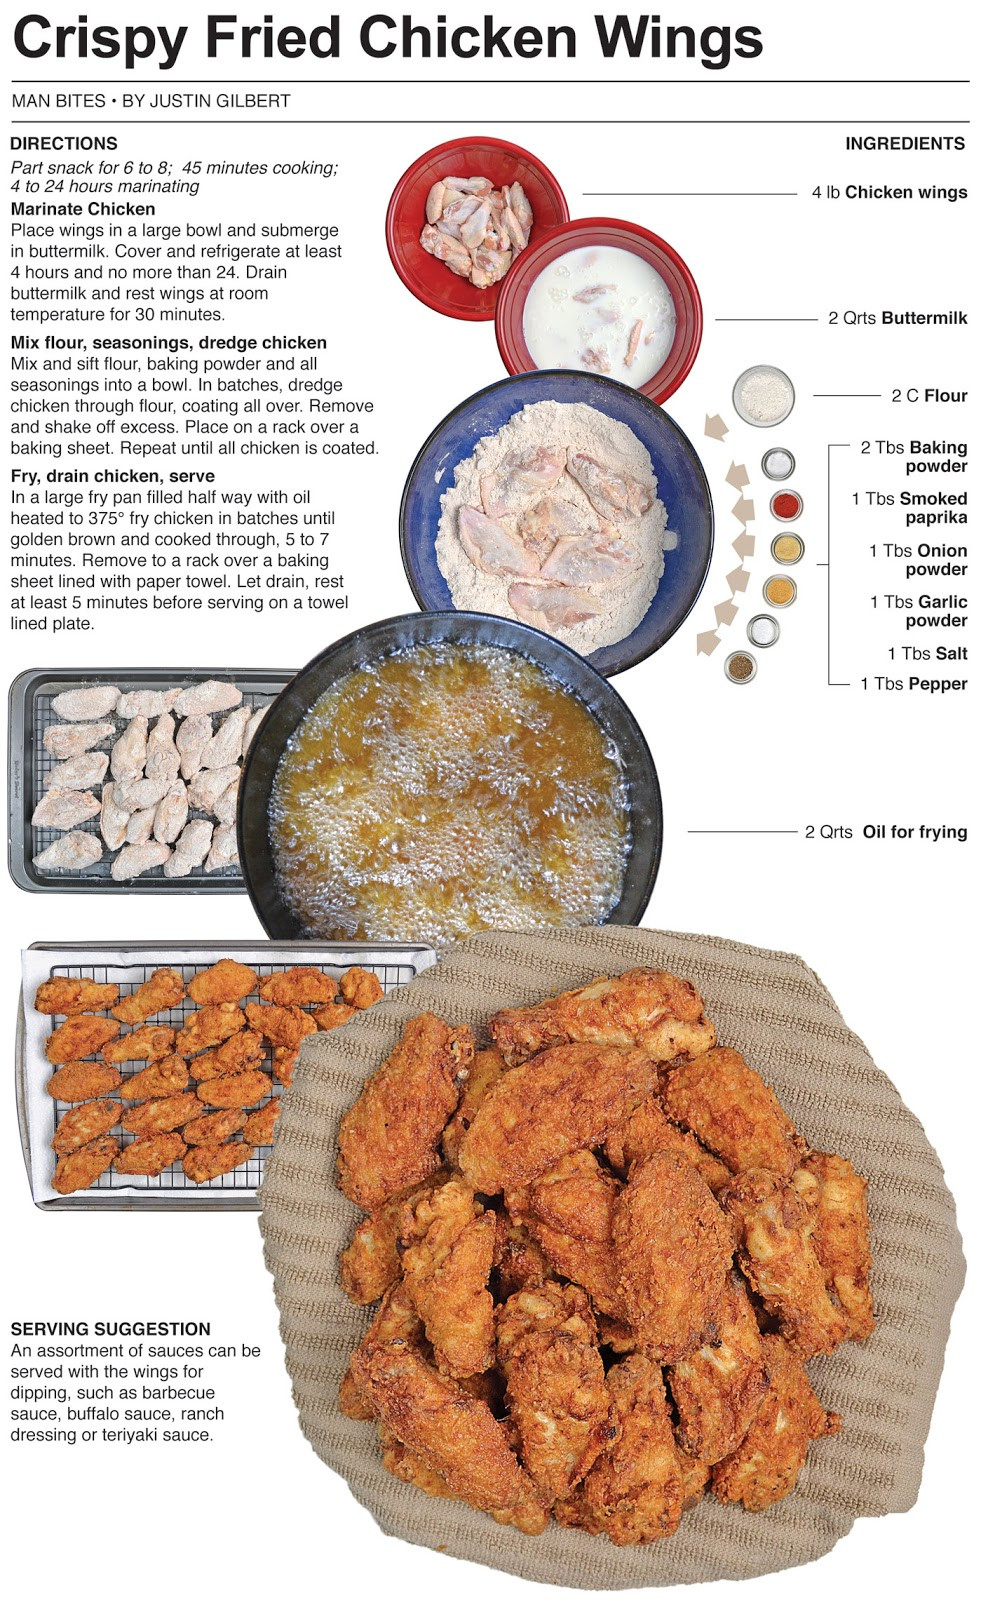 Fried Chicken Wing Recipes
 Behind the Bites Crispy Fried Chicken Wings